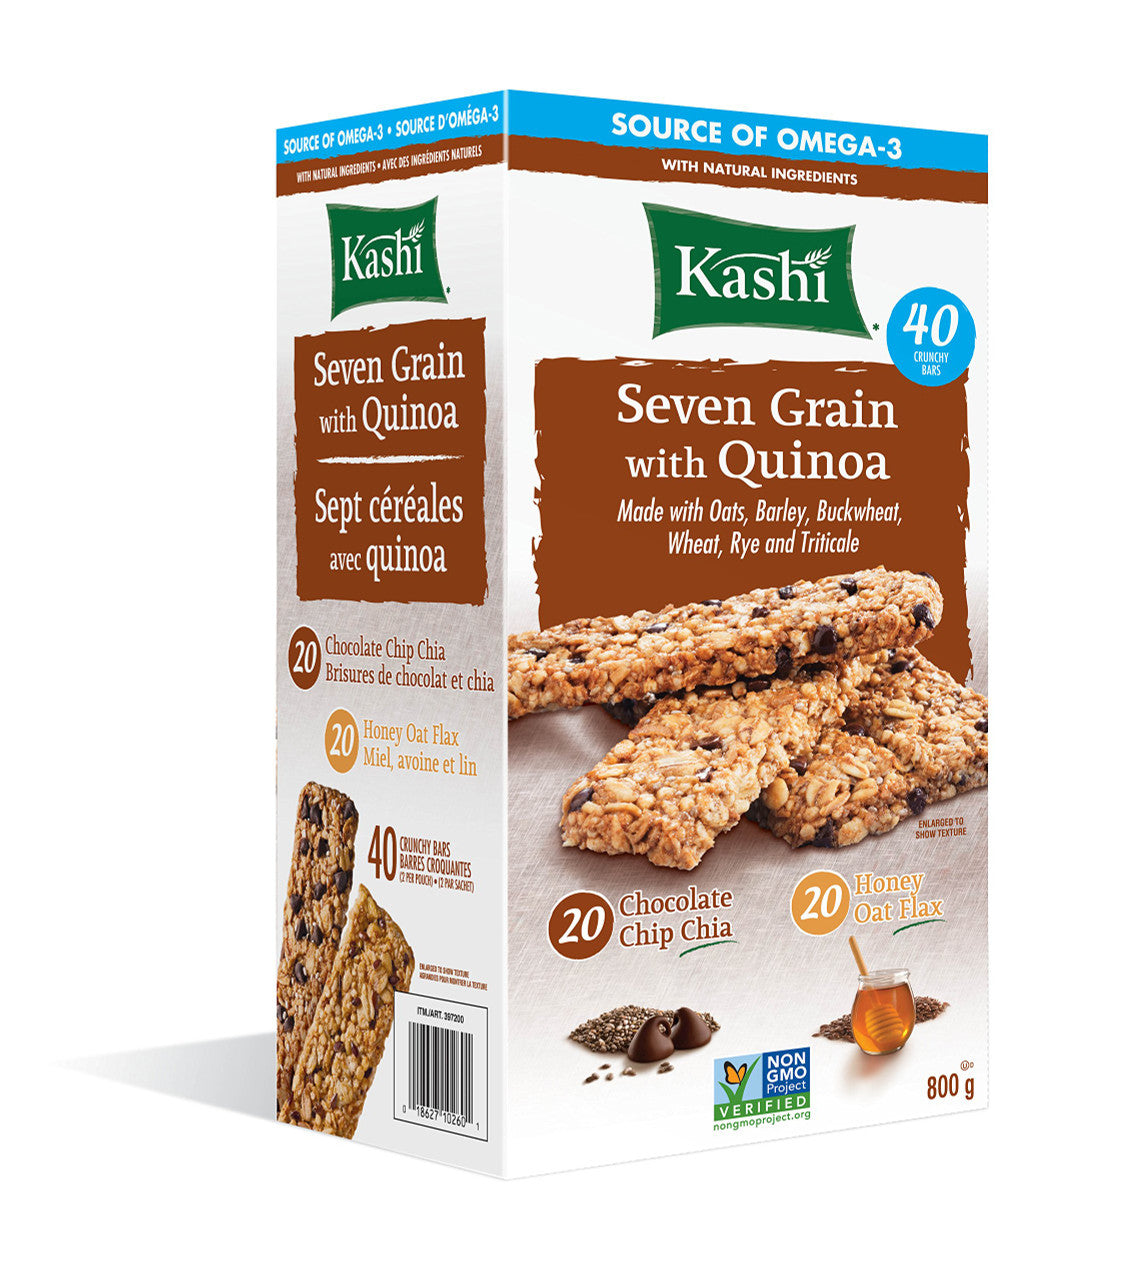 KASHI Seven Grain with Quinoa Bars, 40 Count, 800g/28.2 oz., {Imported from Canada}